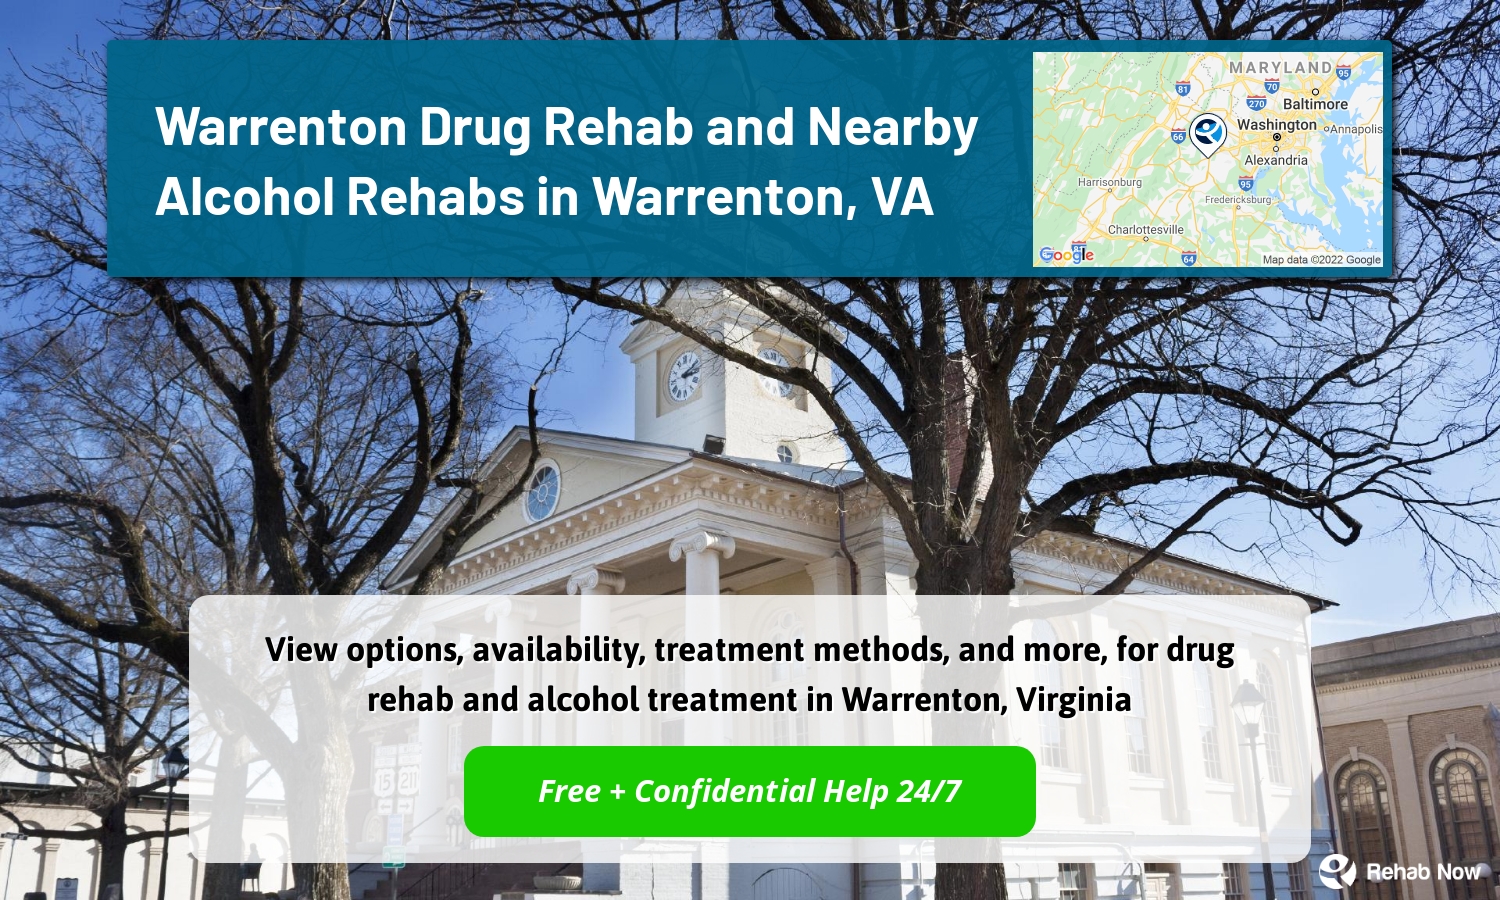 View options, availability, treatment methods, and more, for drug rehab and alcohol treatment in Warrenton, Virginia